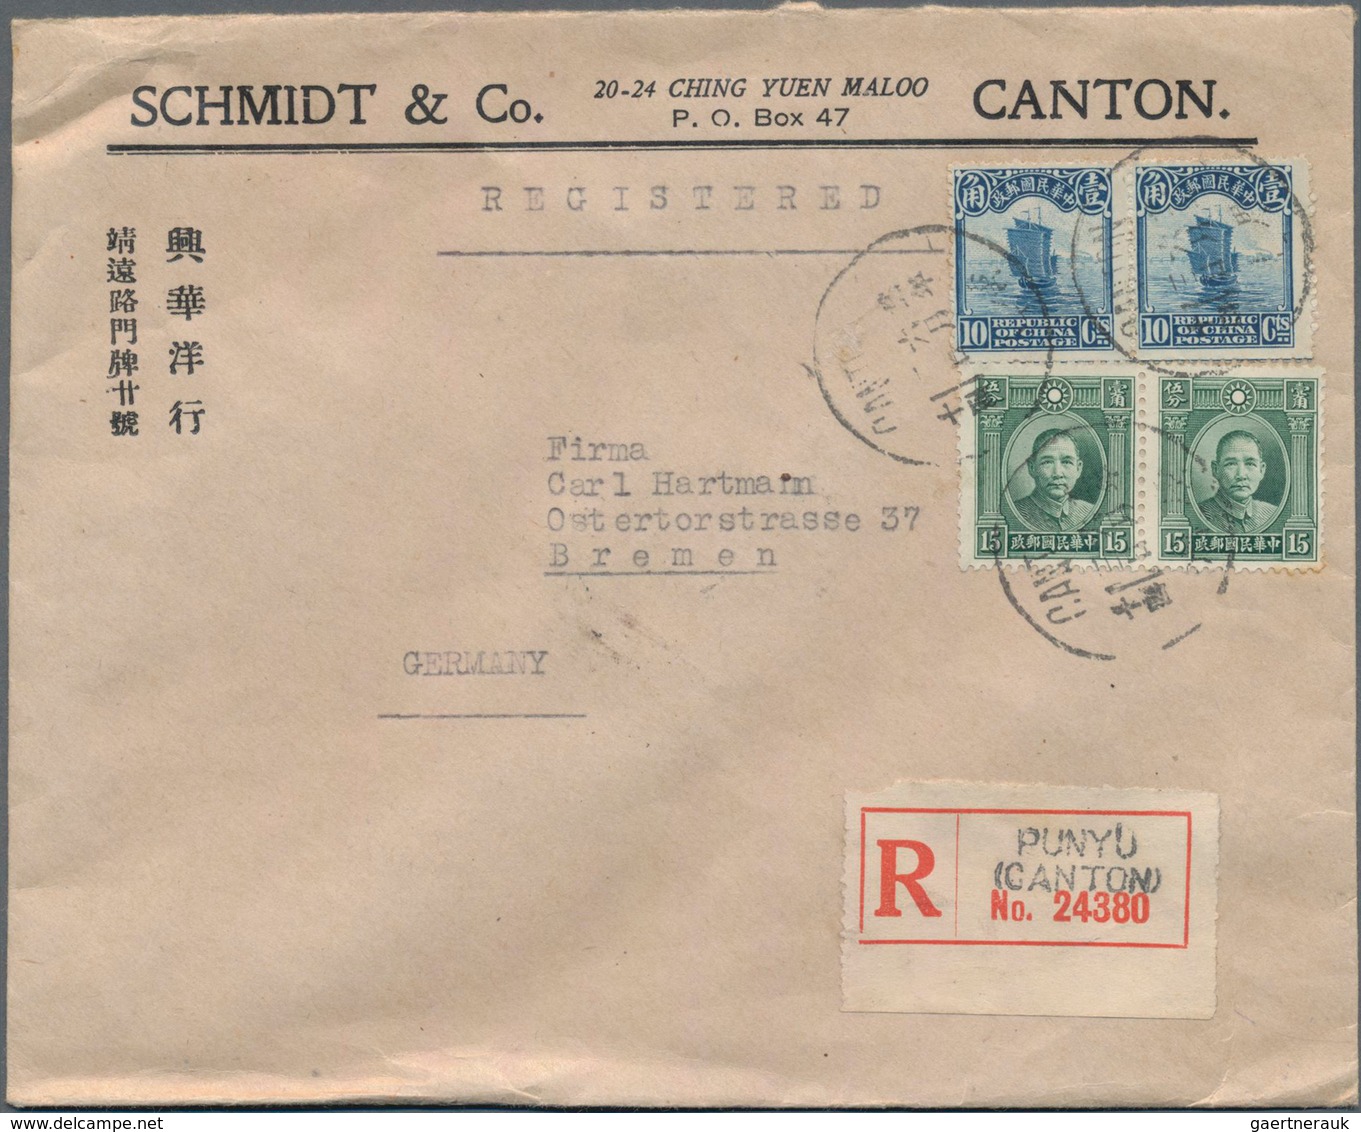 China: 1923/32, (ca.), correspondence of covers (30, inc. 17 registered) all to Germany, from Schmid